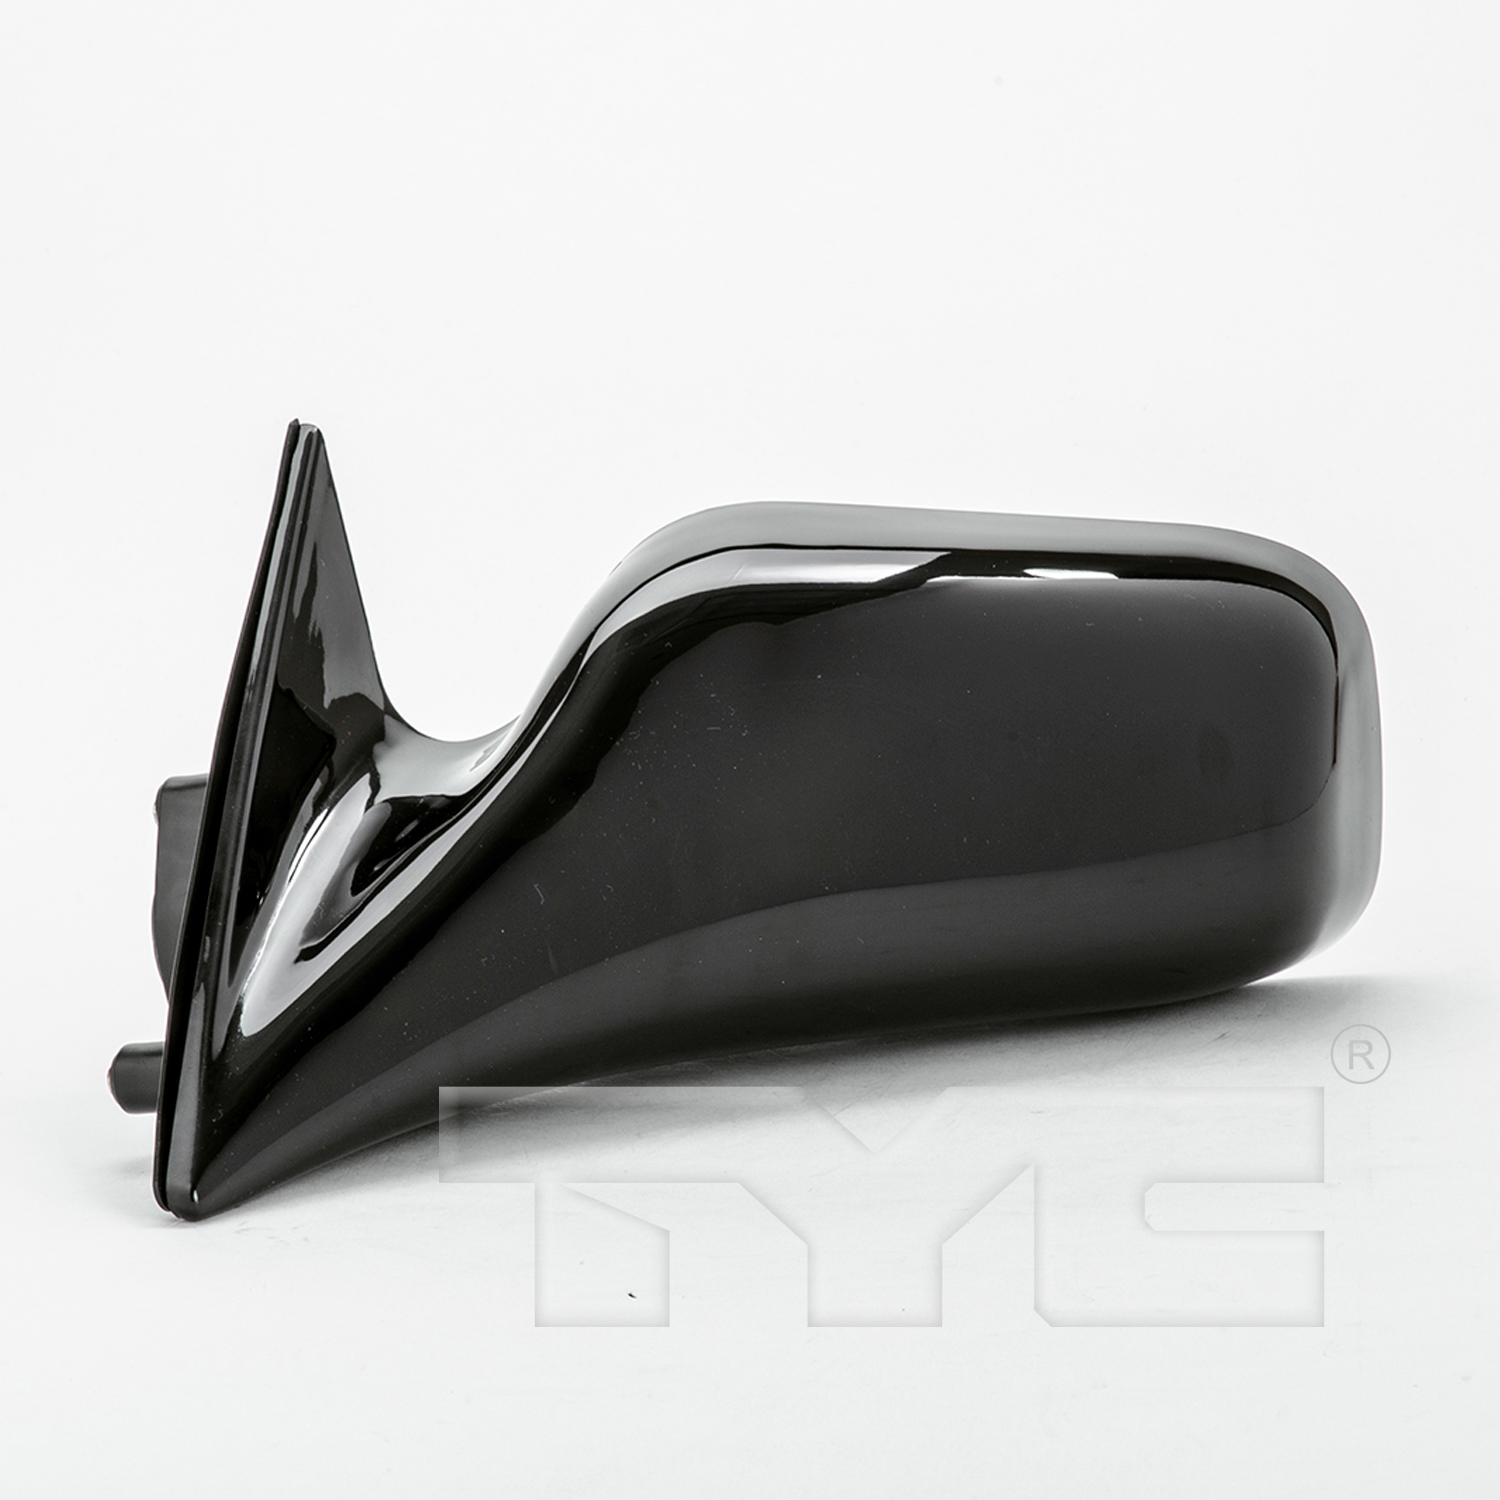 Aftermarket MIRRORS for TOYOTA - CAMRY, CAMRY,92-96,LT Mirror outside rear view